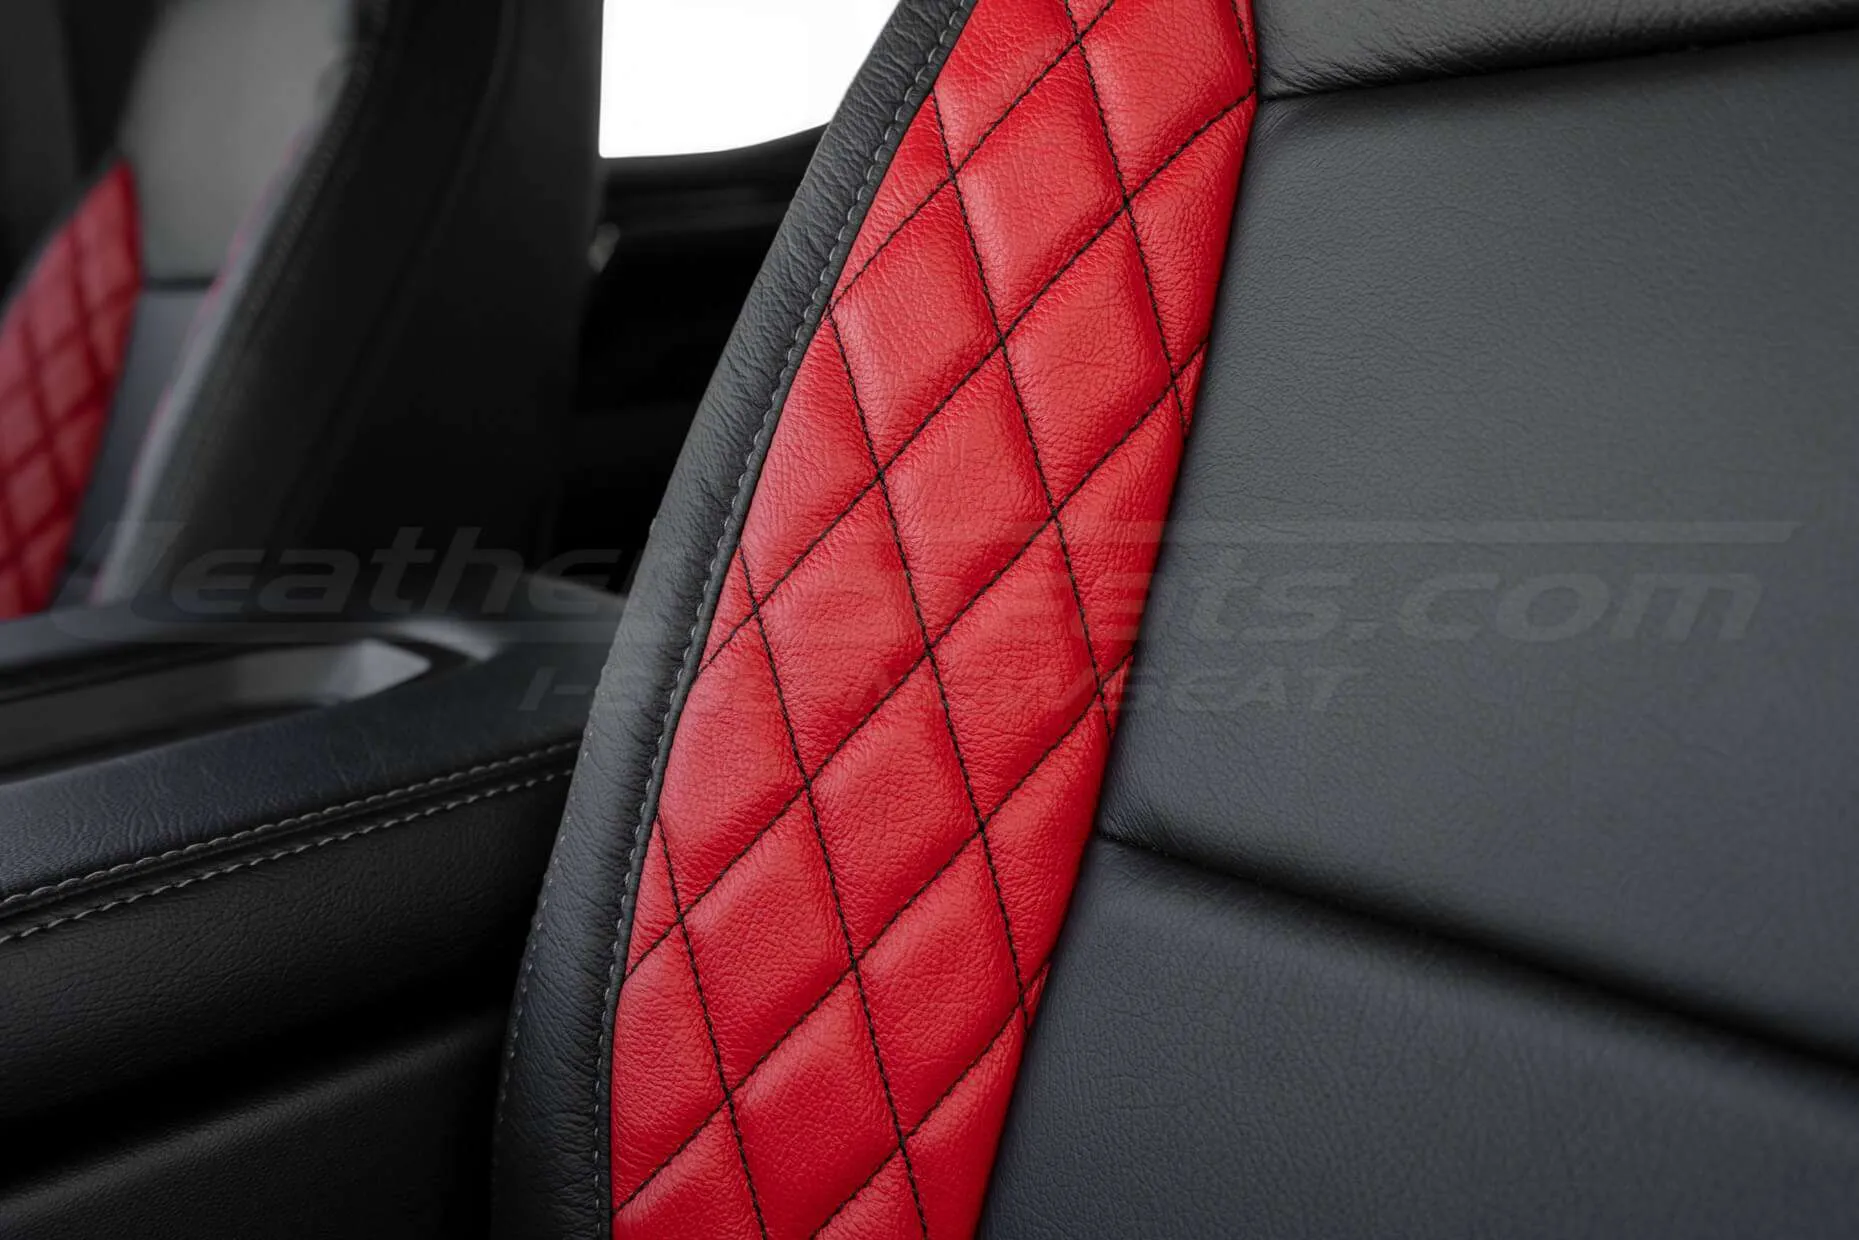 Quilted Diamonds on win section of leather seats